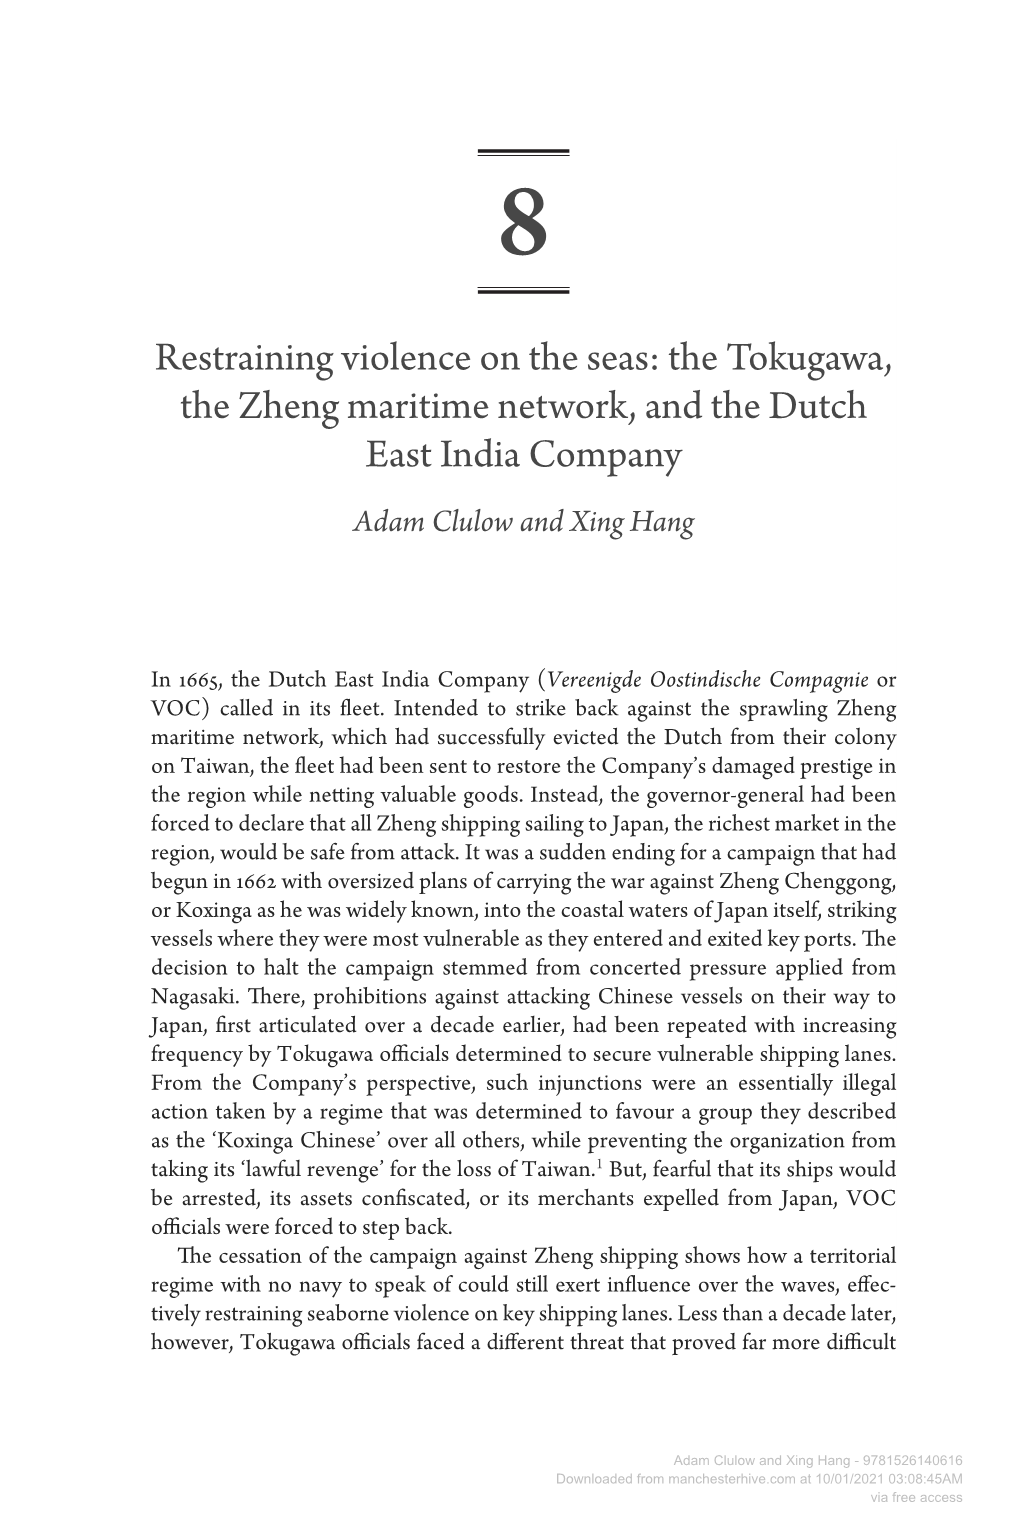 Restraining Violence on the Seas: the Tokugawa, the Zheng Maritime Network, and the Dutch East India Company Adam Clulow and Xing Hang